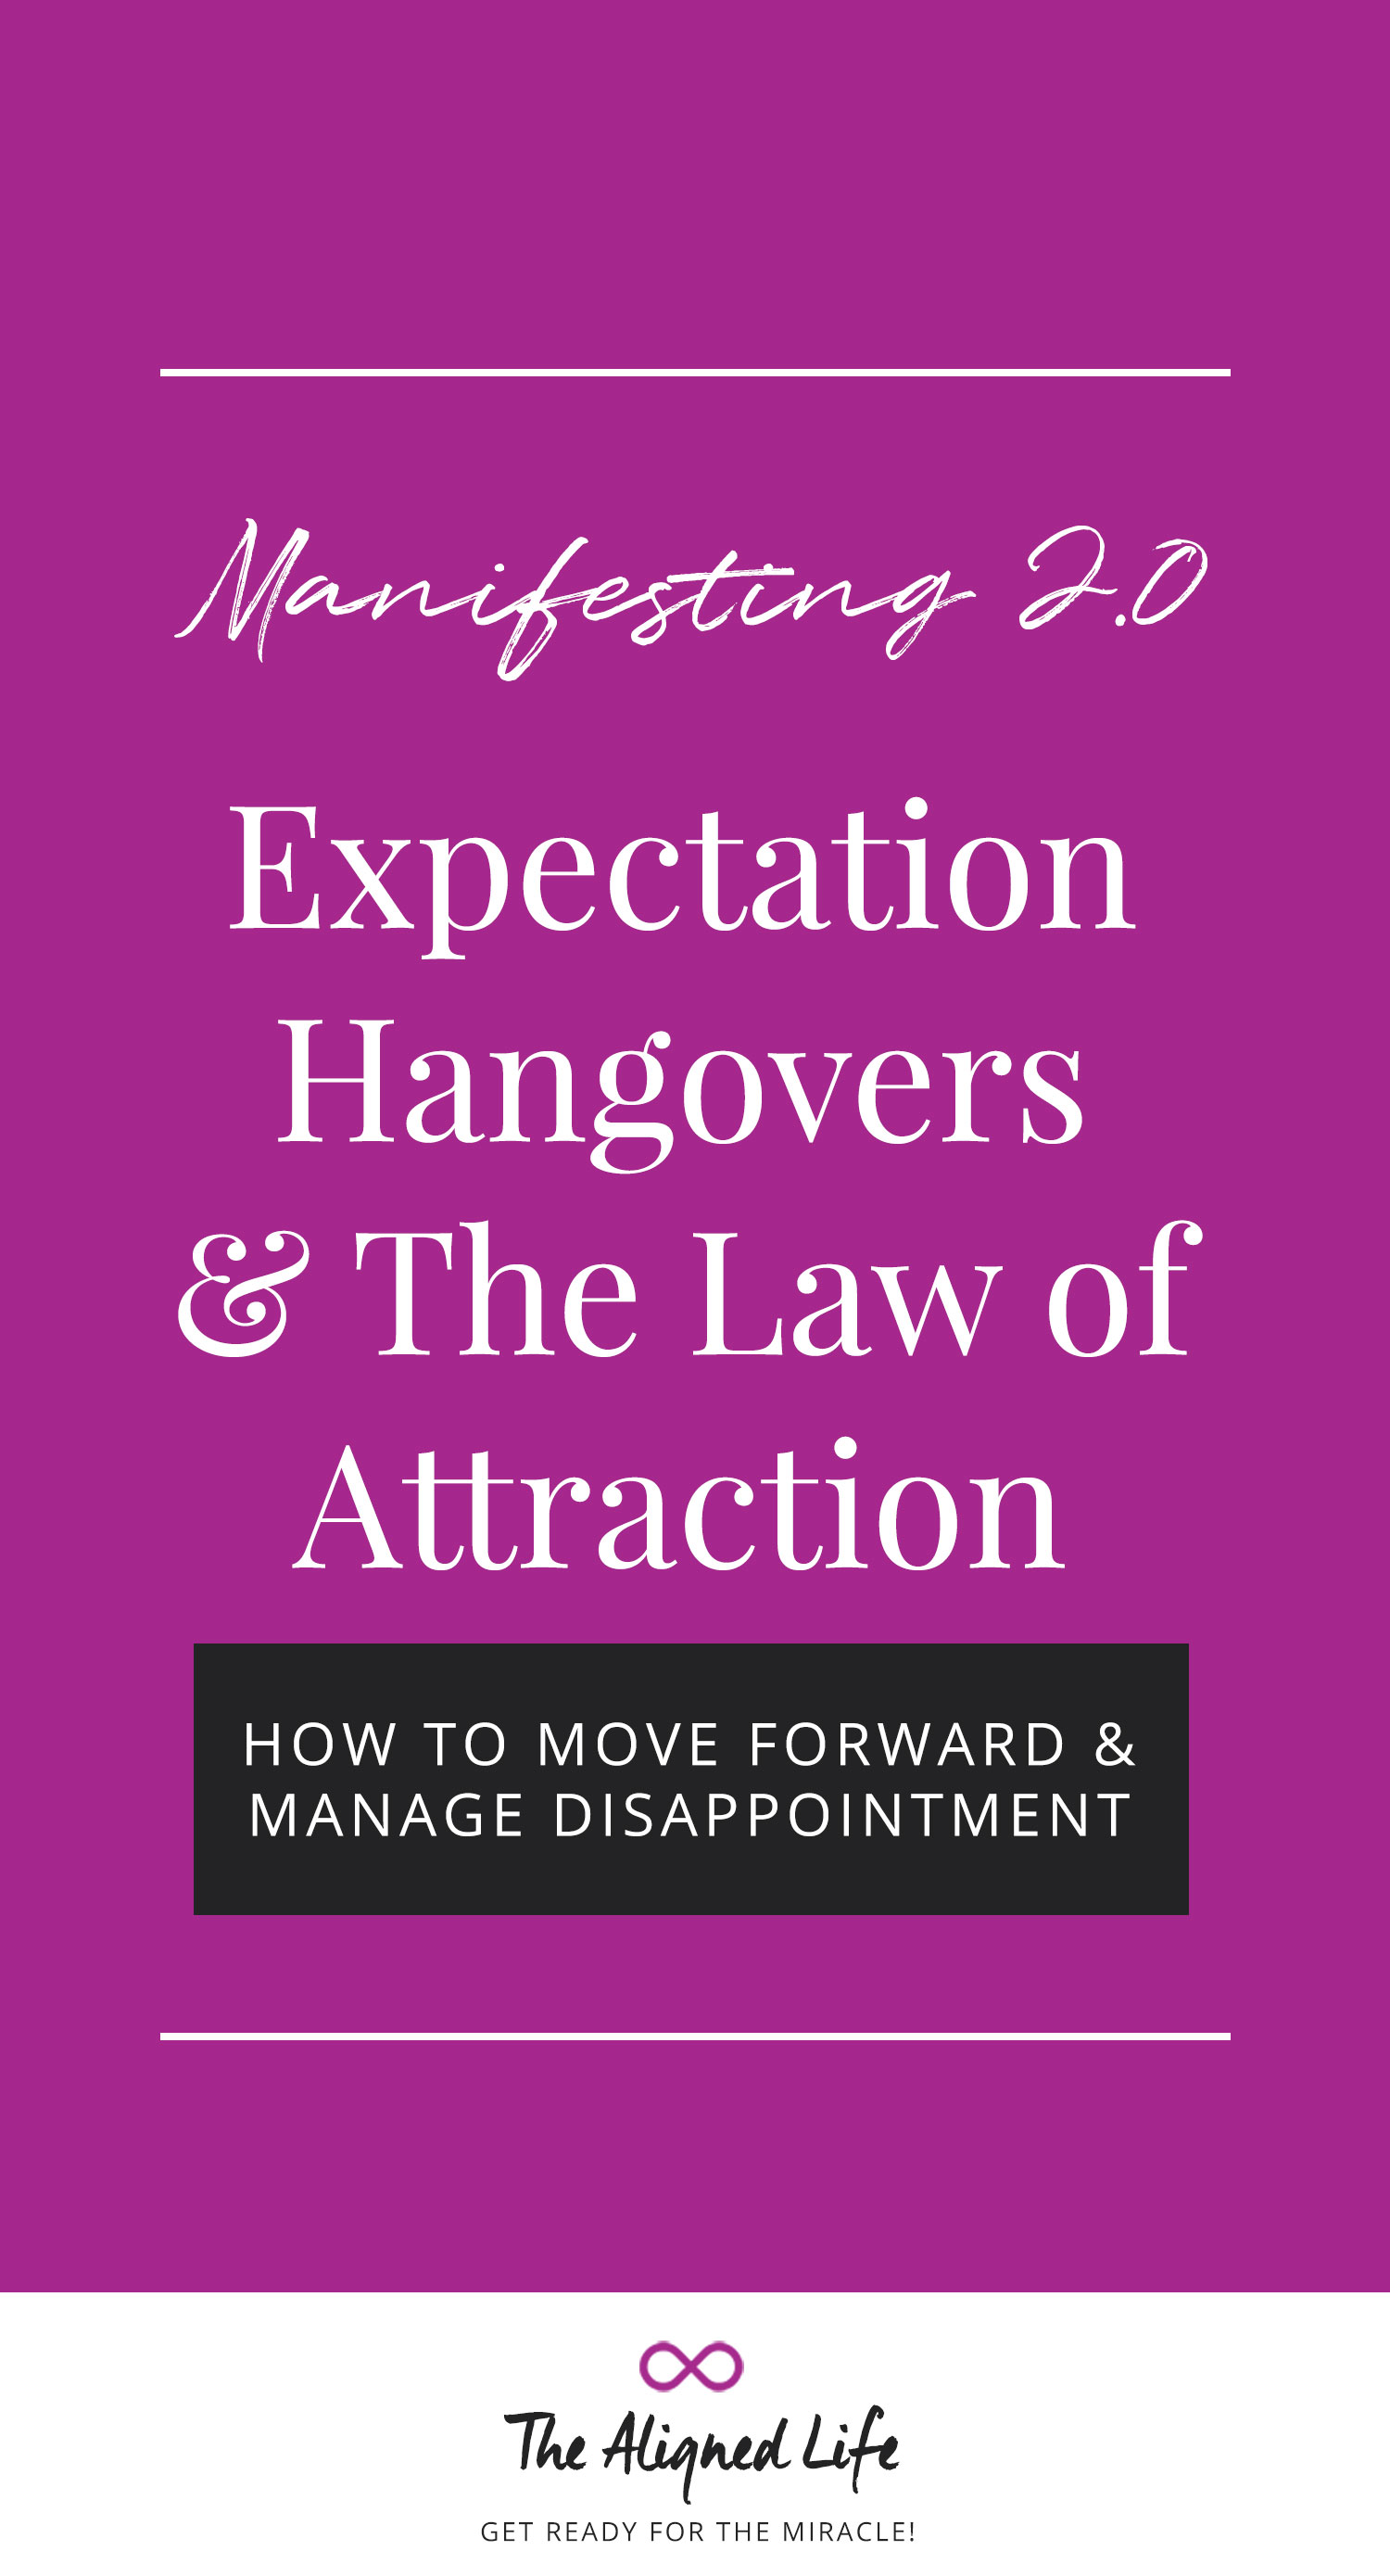 Manifesting 2.0: Expectation Hangovers + The Law of Attraction